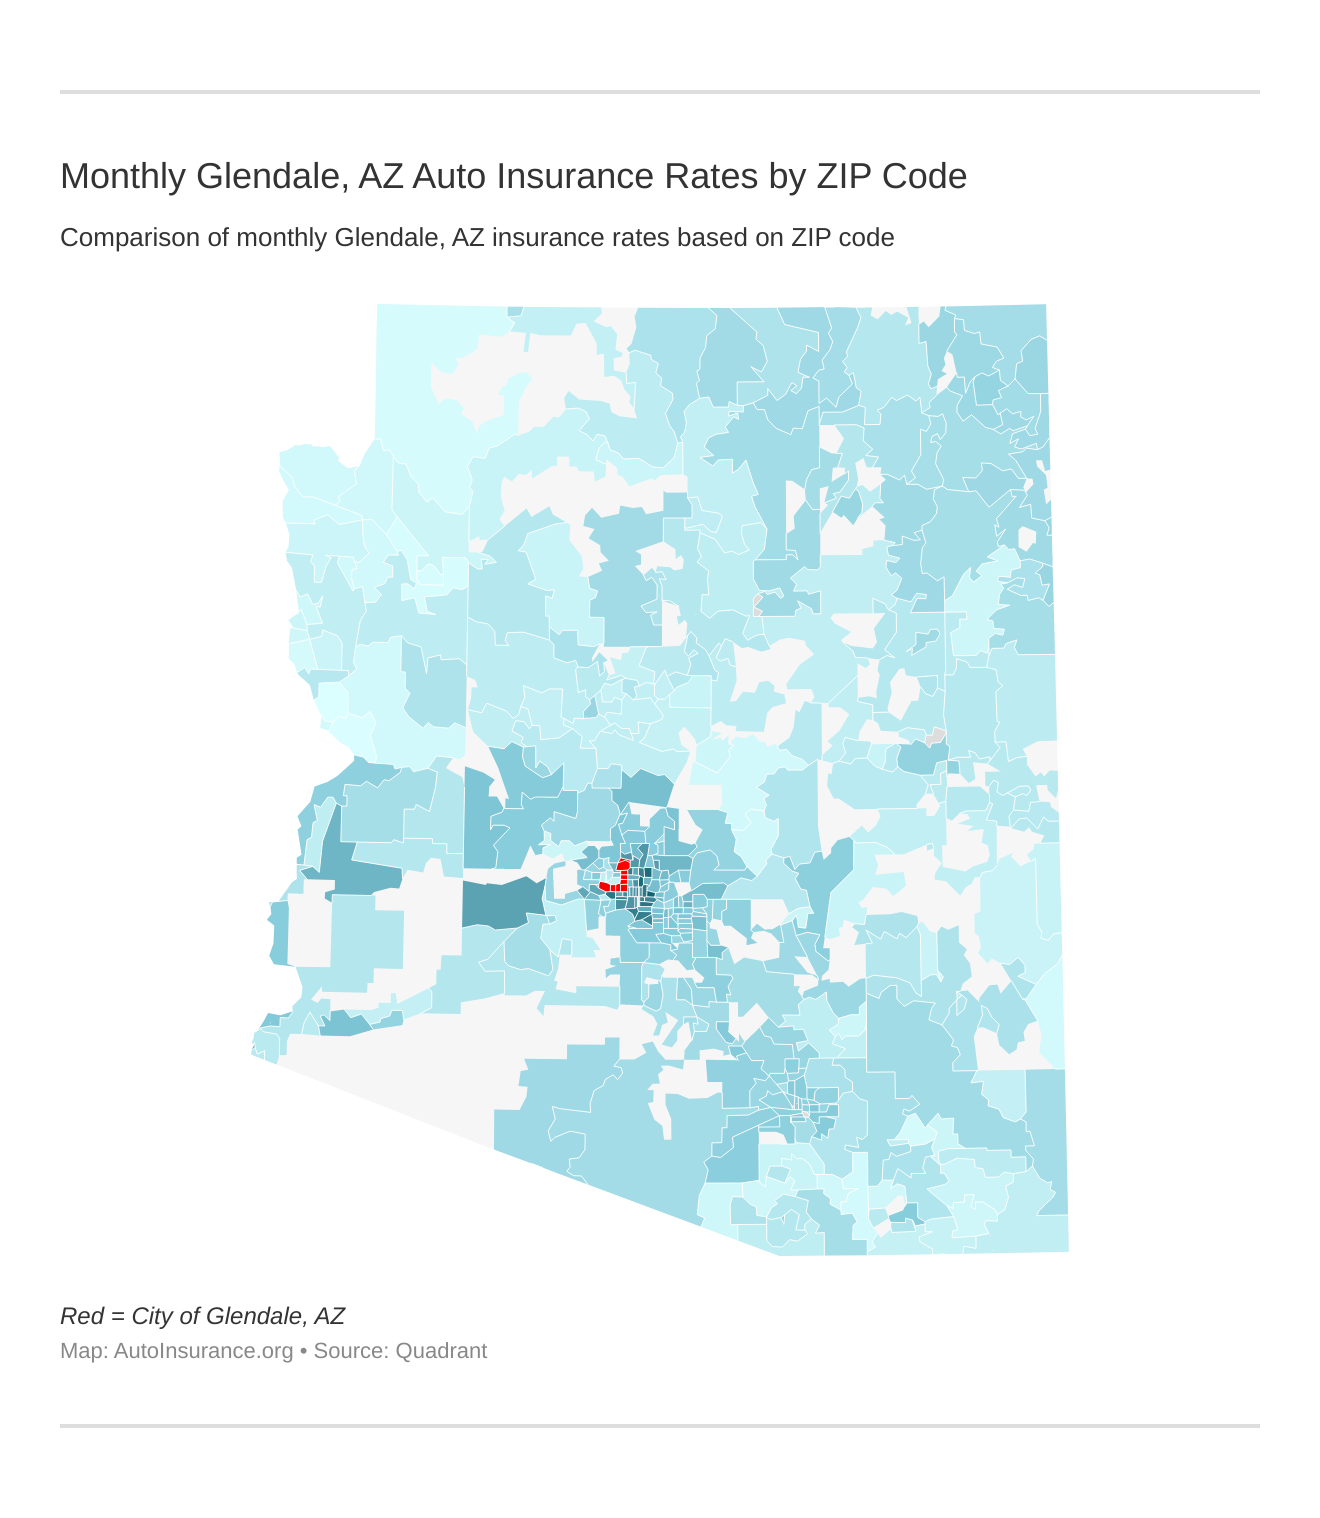 Monthly Glendale, AZ Auto Insurance Rates by ZIP Code